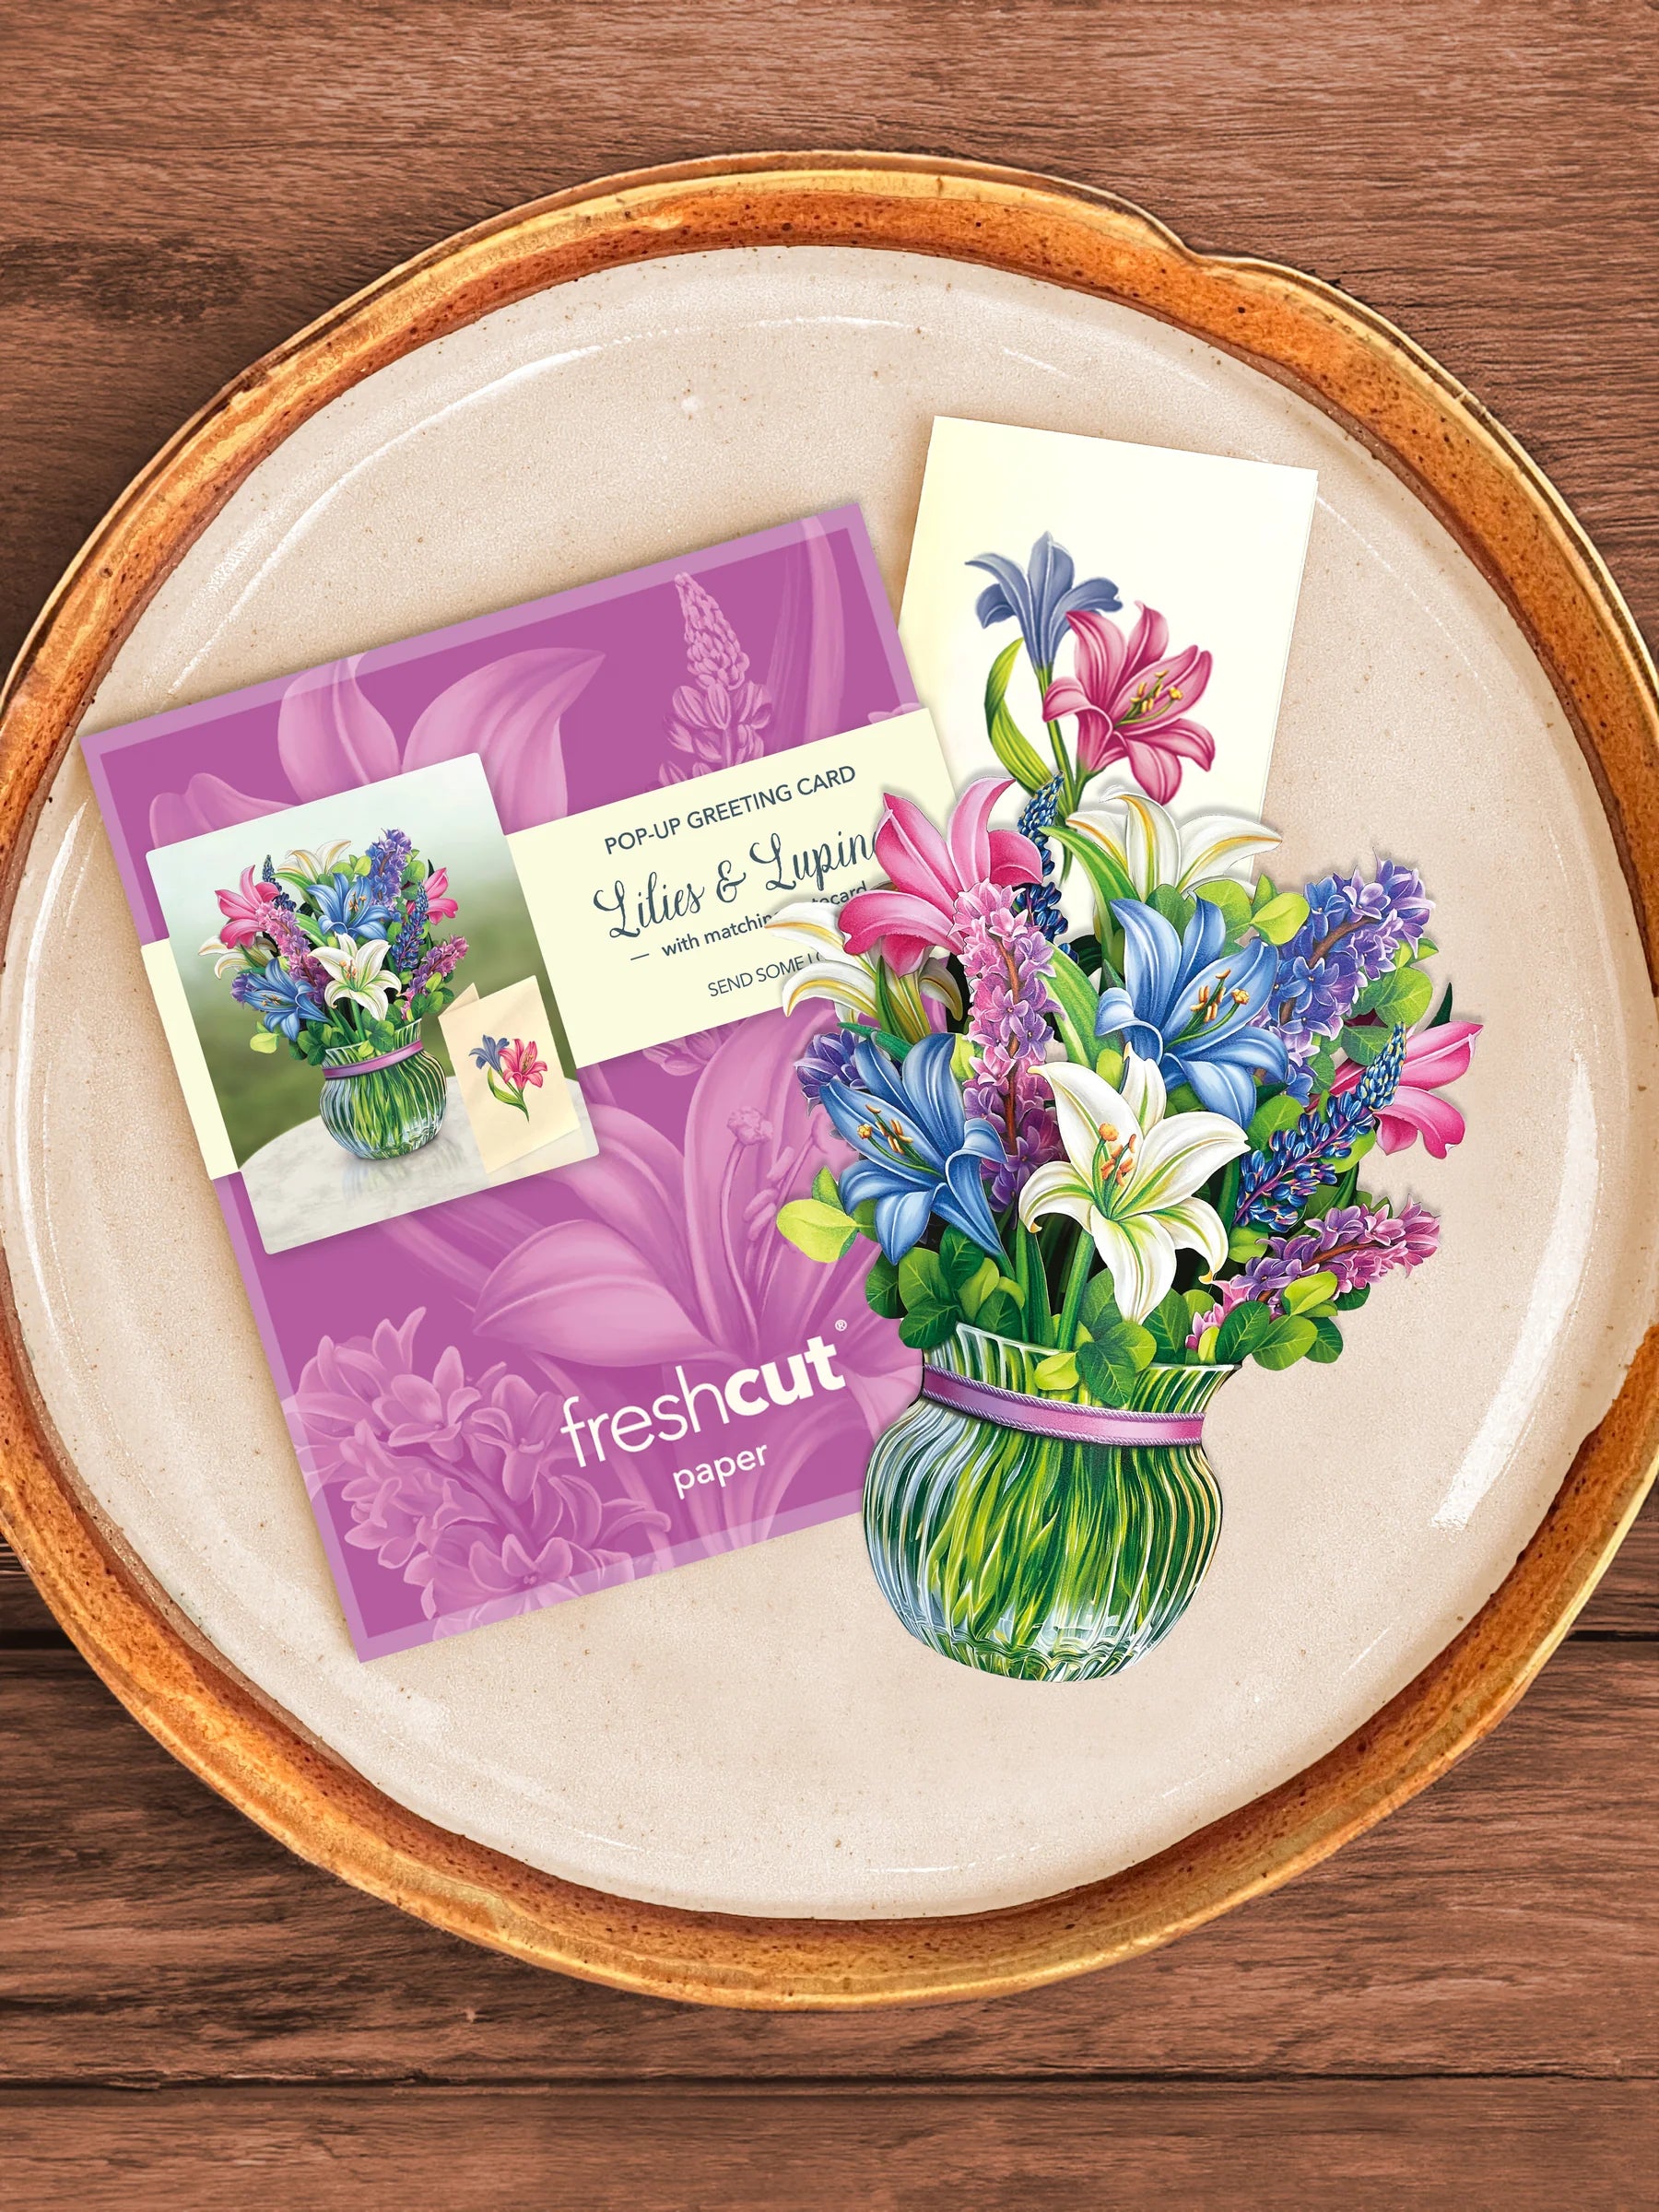 Lilies & Lupines bouquet, enclosure card, and mailing envelope arranged on a tray.